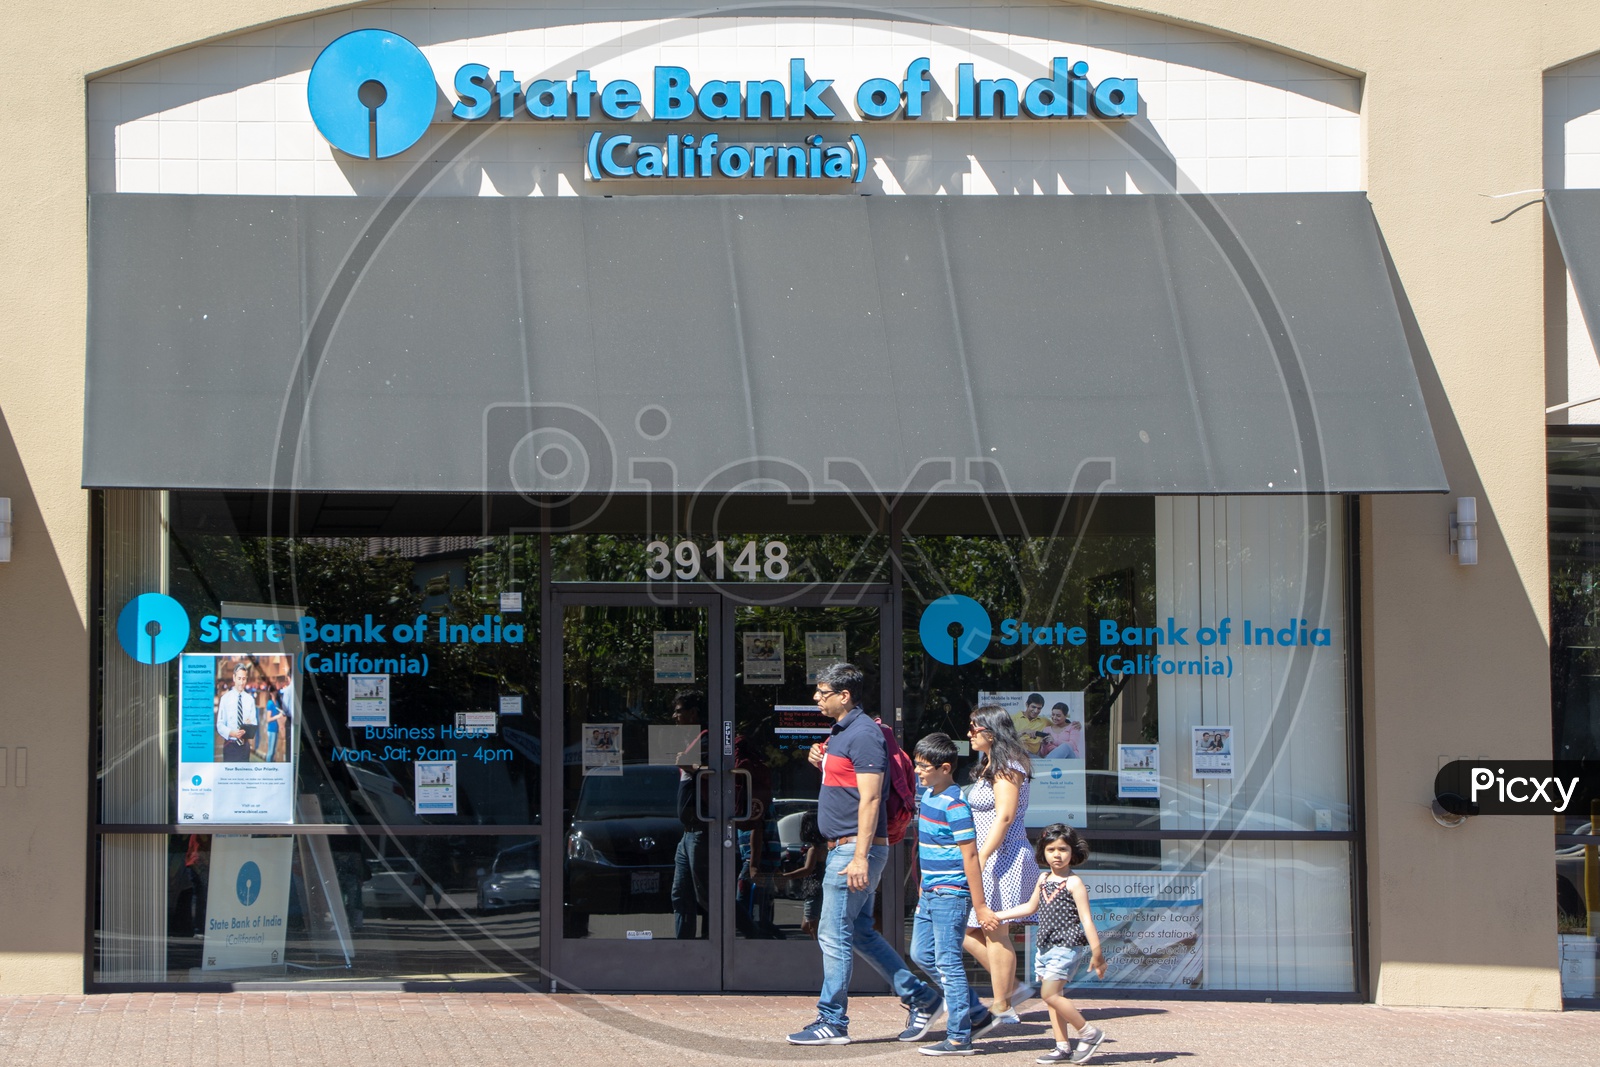 State Bank of India, California